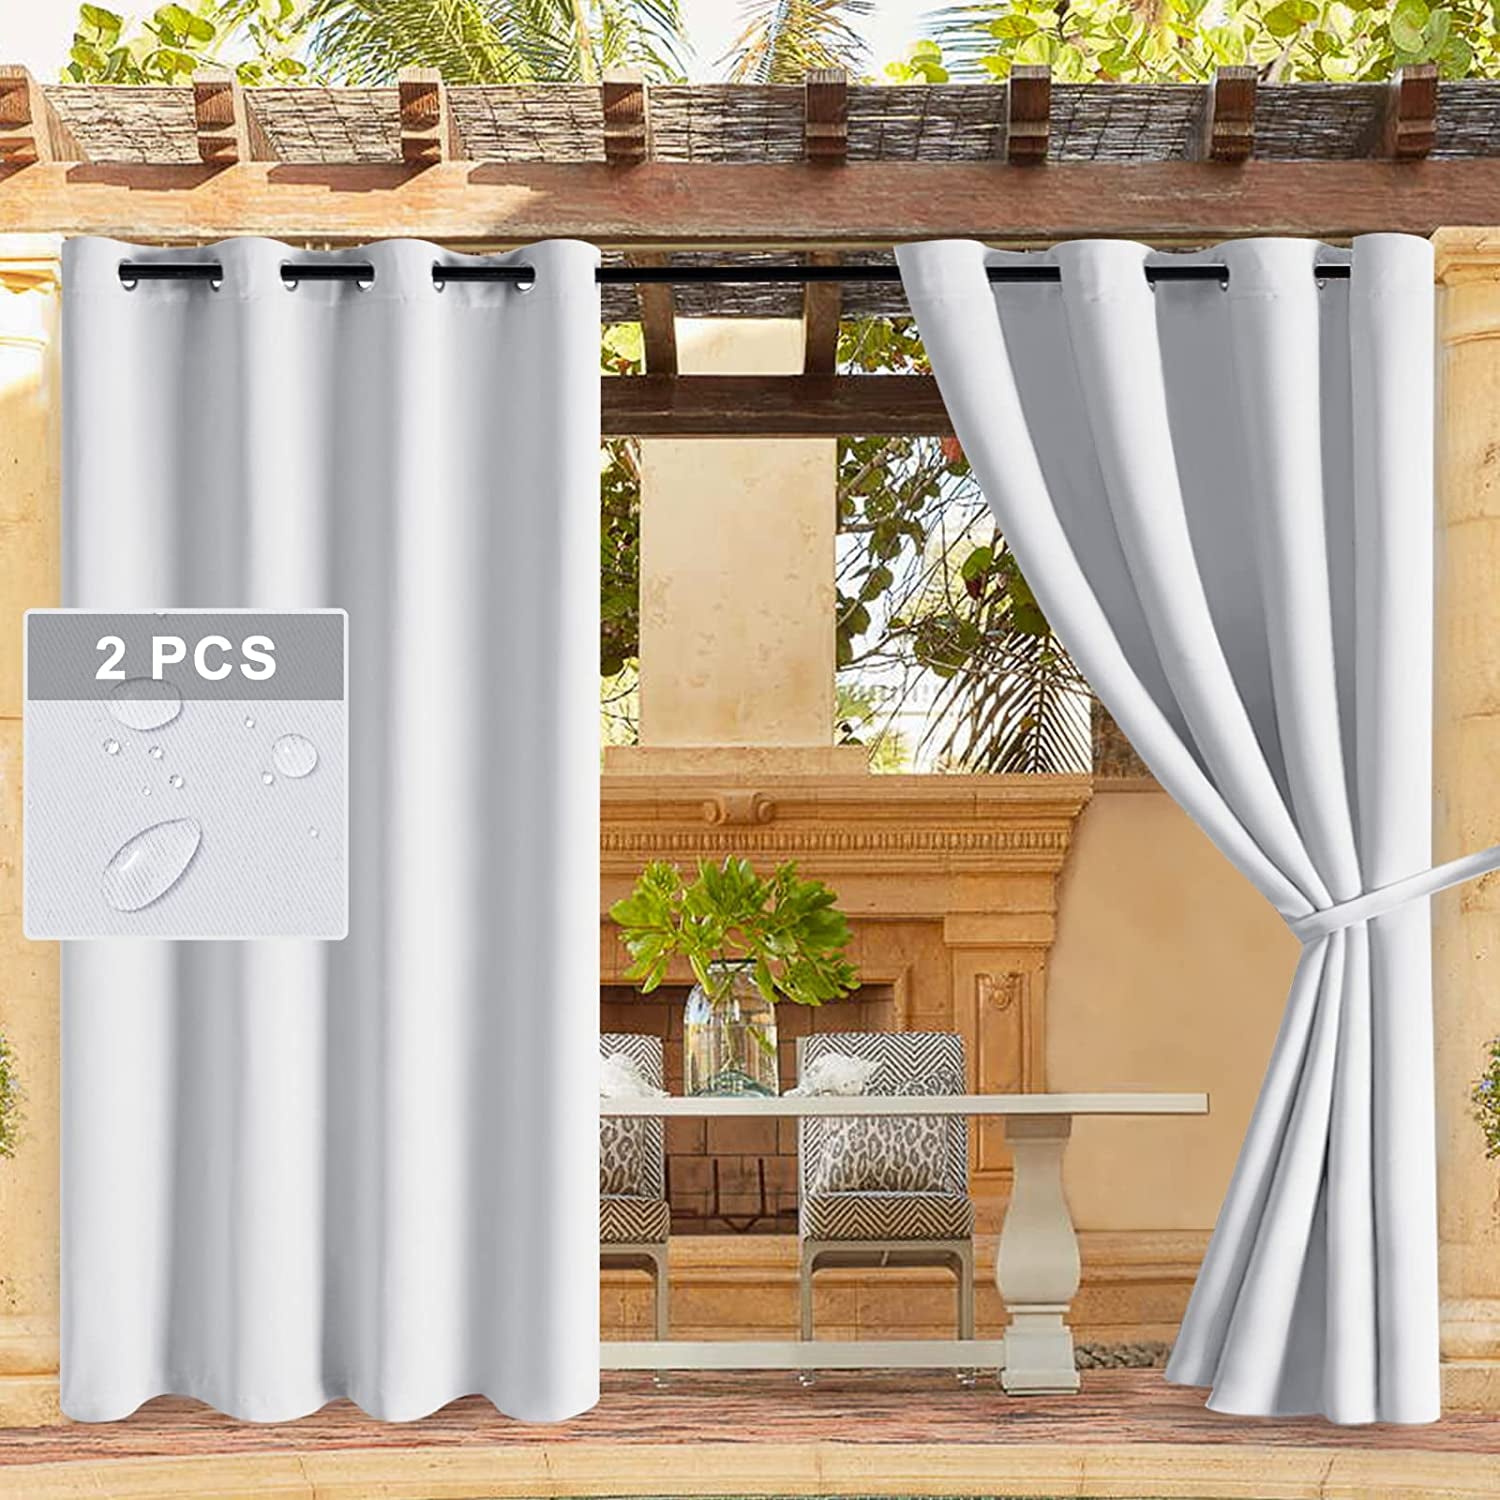 DWCN, DWCN Waterproof Outdoor Curtains for Patio -Indoor Outdoor Thermal Insulated, Sun Blocking Grommet Blackout Curtains for Bedroom, Pergola, Porch and Cabana, White, 52 X 84 Inches Long, 2 Panels